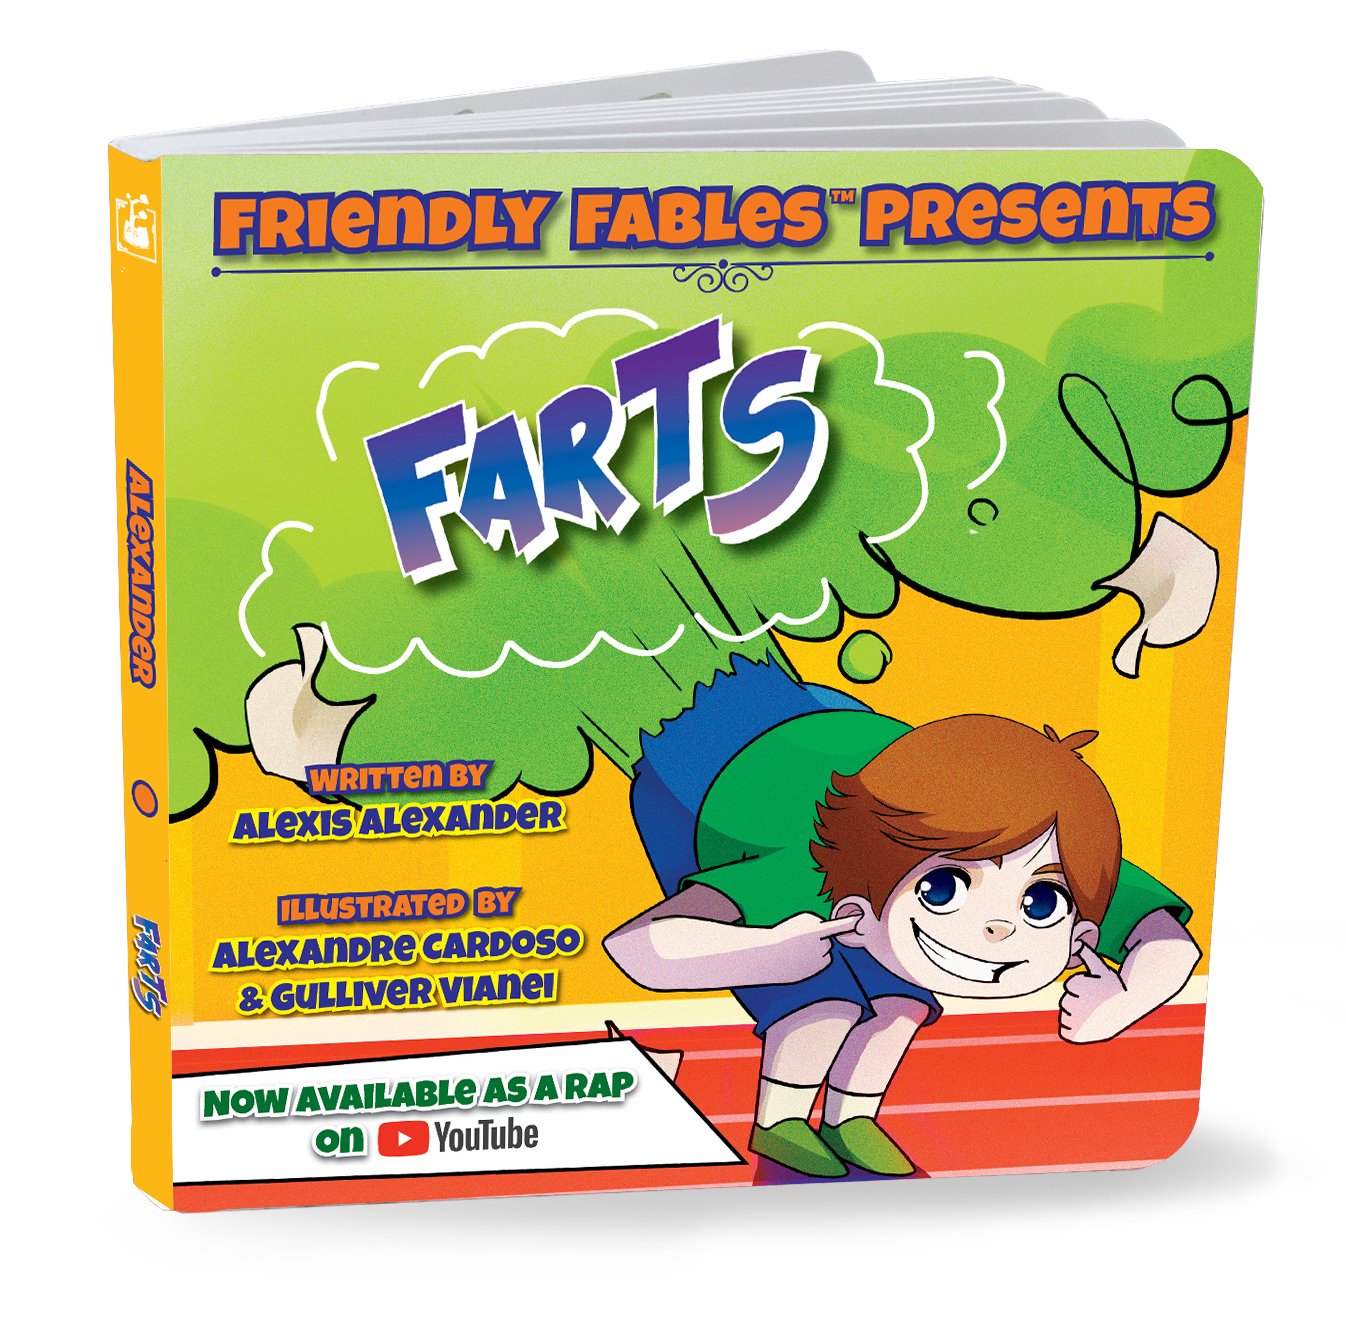 fart noises Poster for Sale by wrebagzhoe